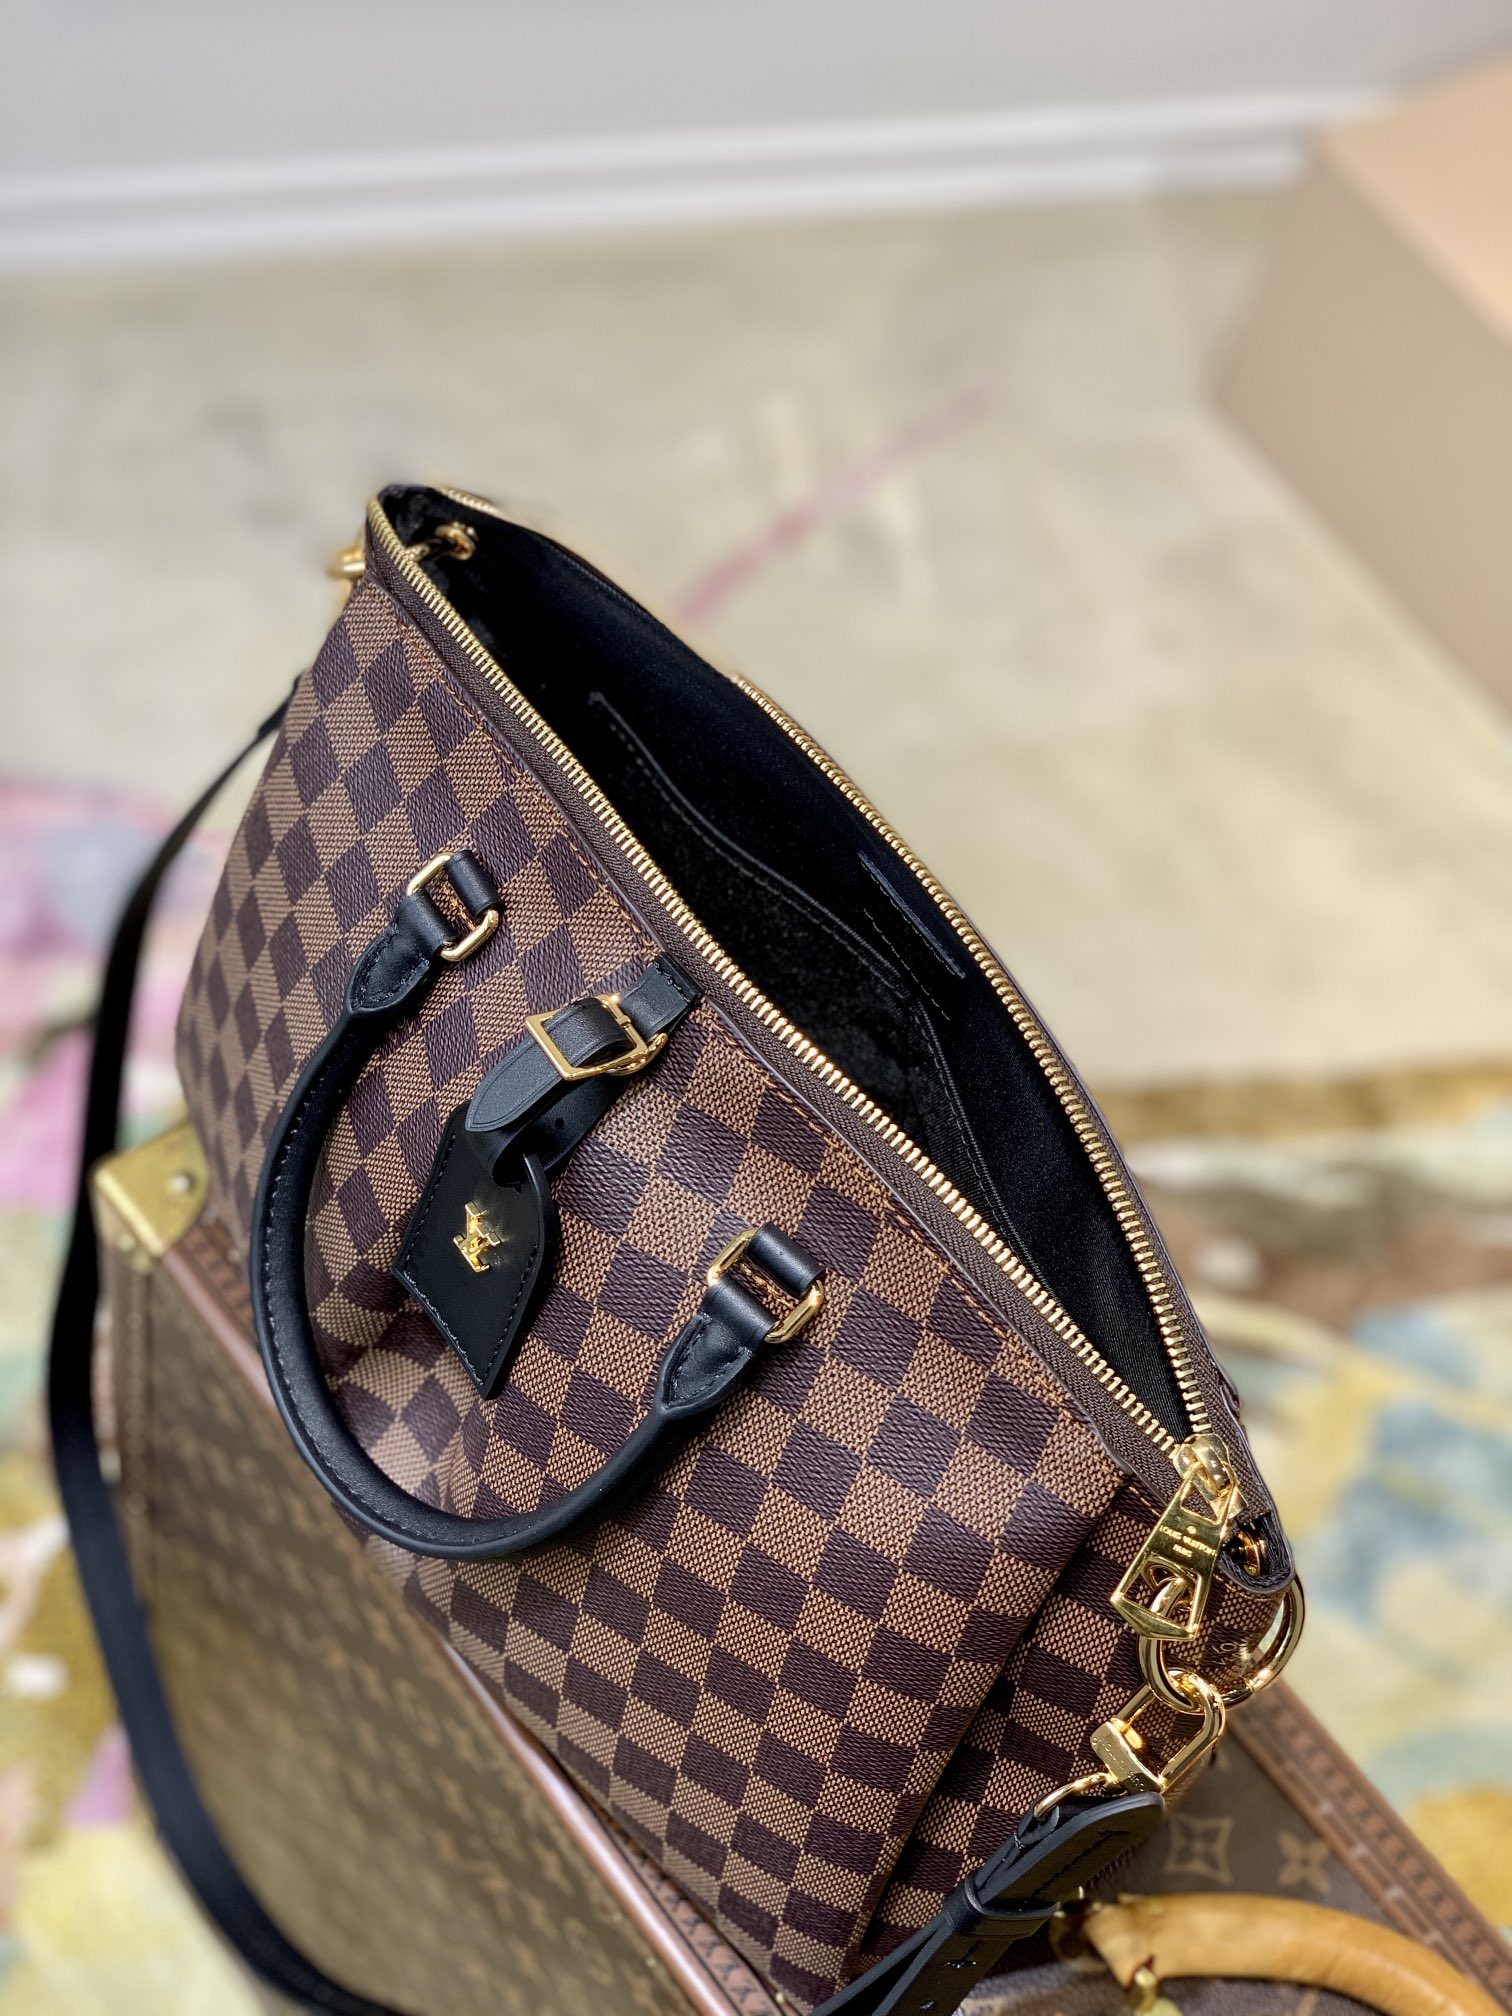 LOUIS VUITTON LOUIS VUITTON Odeon Tote MM 2way Shoulder Bag N45283 Damier  canvas Used Women LV N45283｜Product Code：2101216982345｜BRAND OFF Online  Store